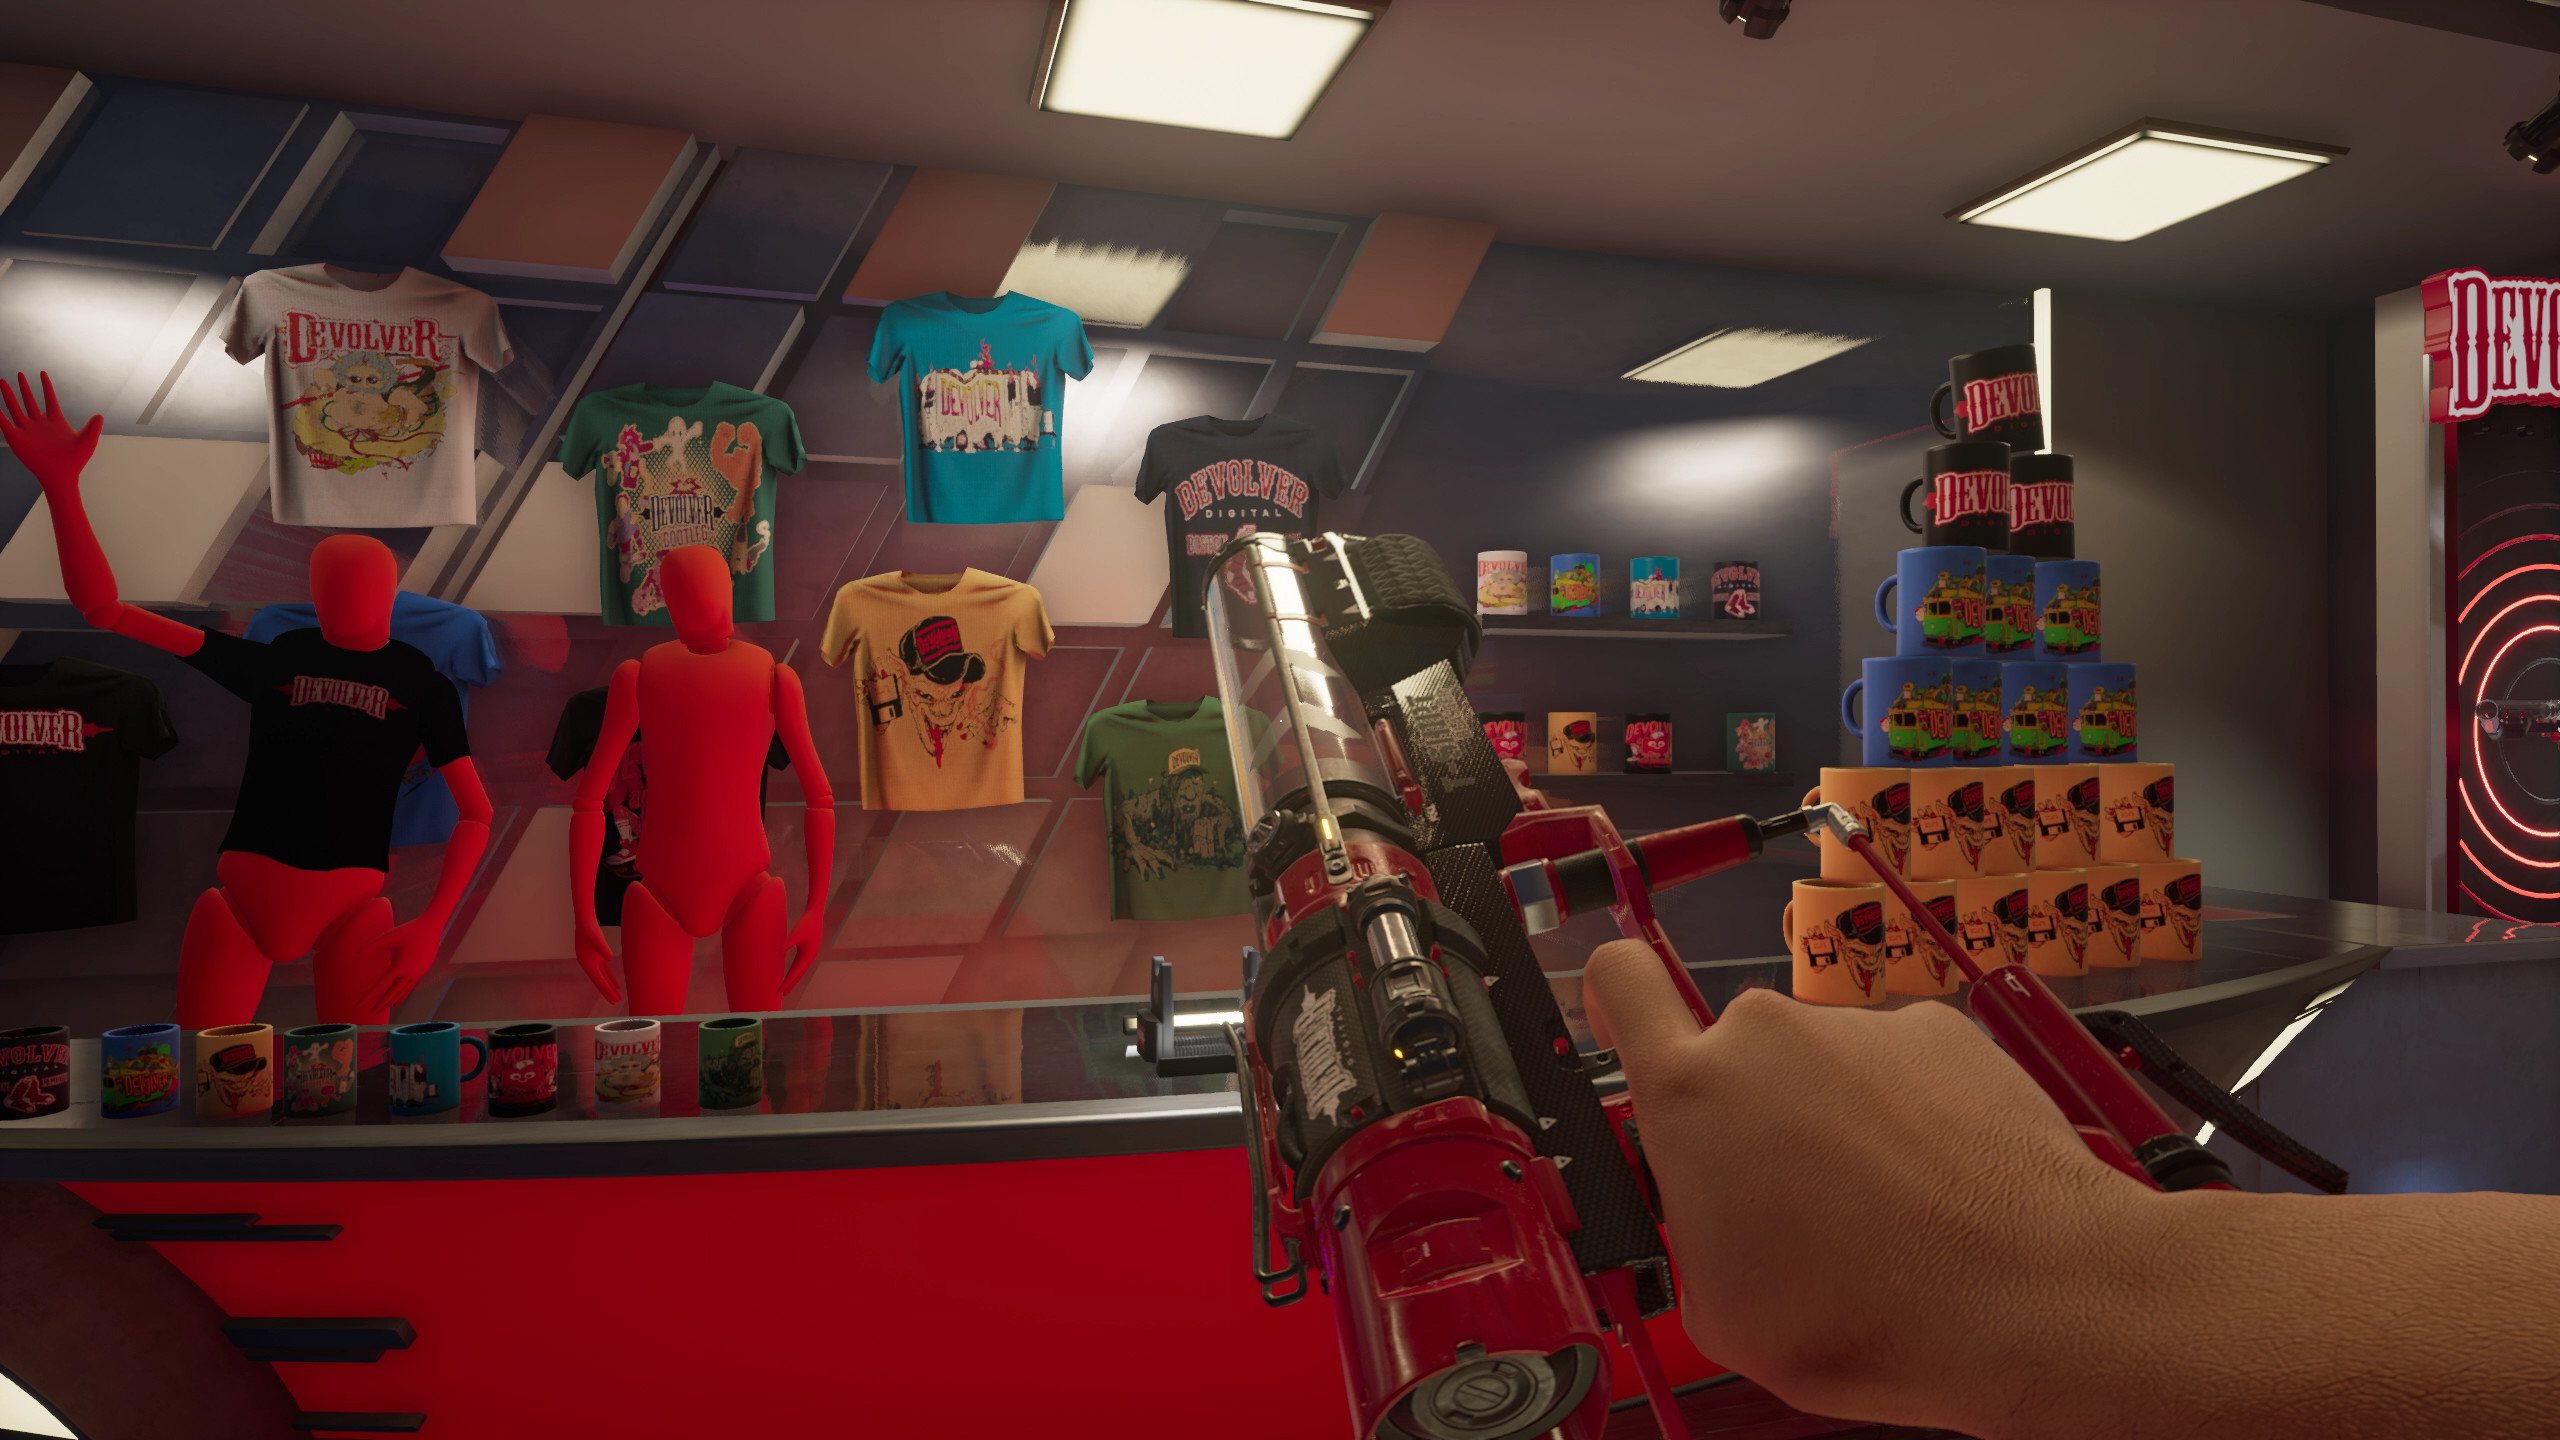  Devolver Digital surprise-released a free game about themselves 